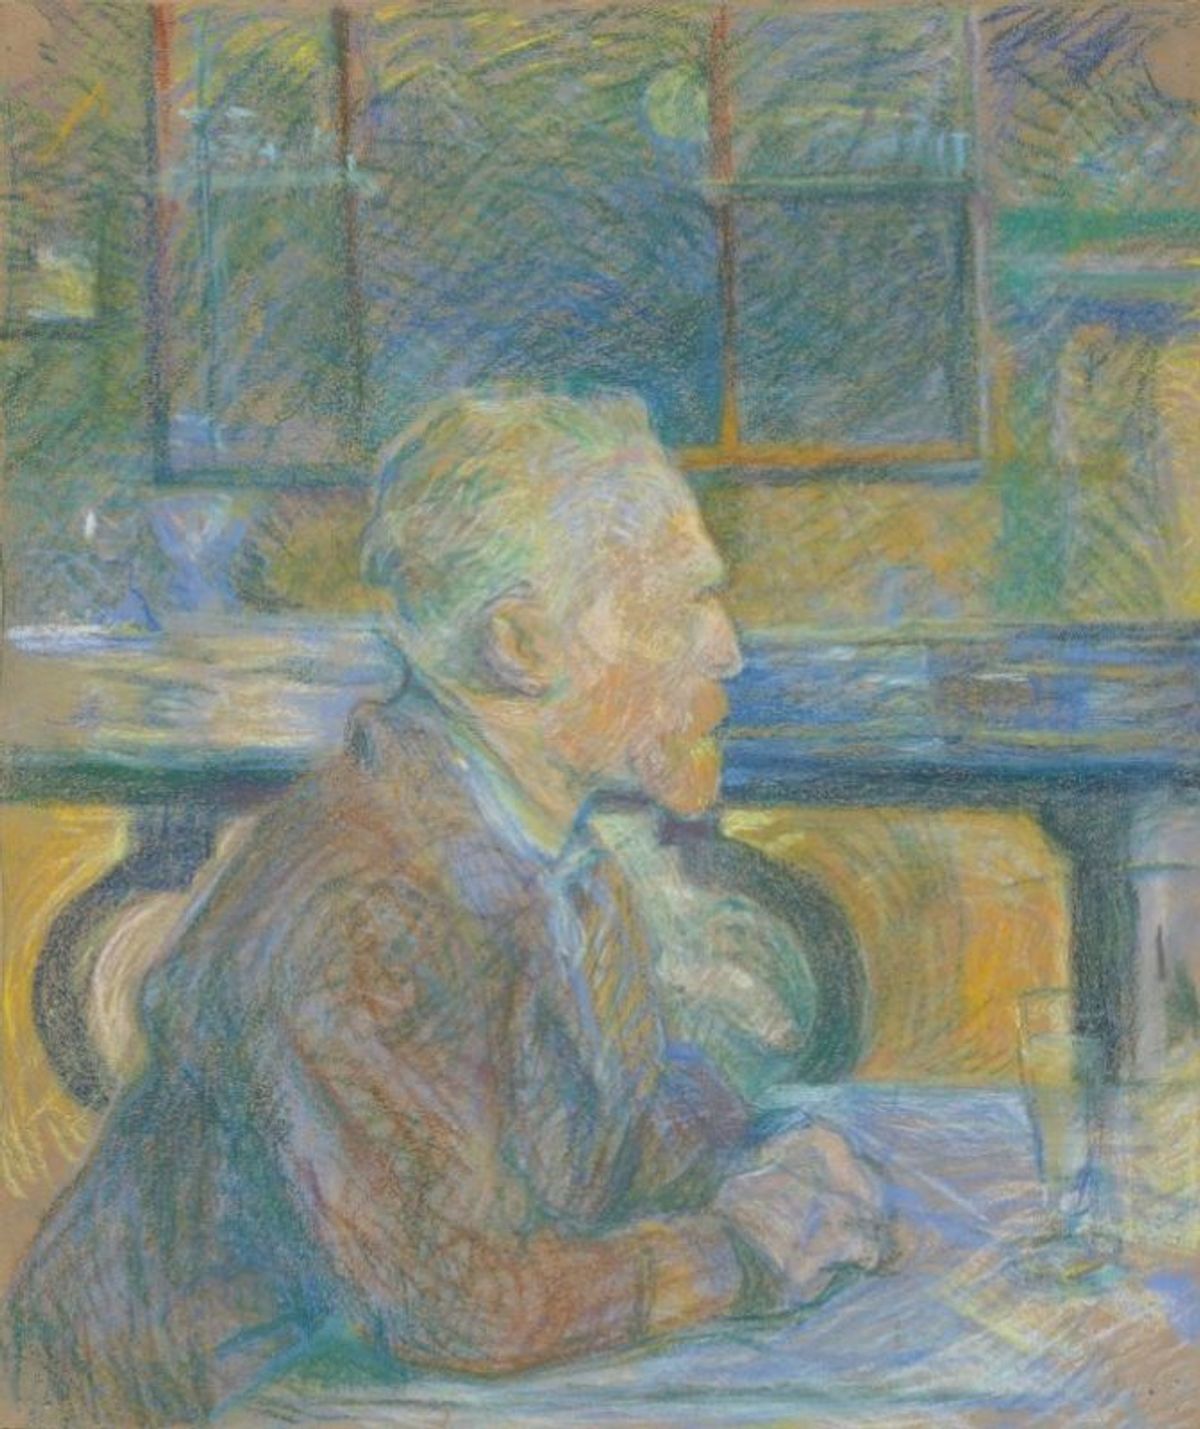 The Woman Who Brought Van Gogh to the World, Arts & Culture